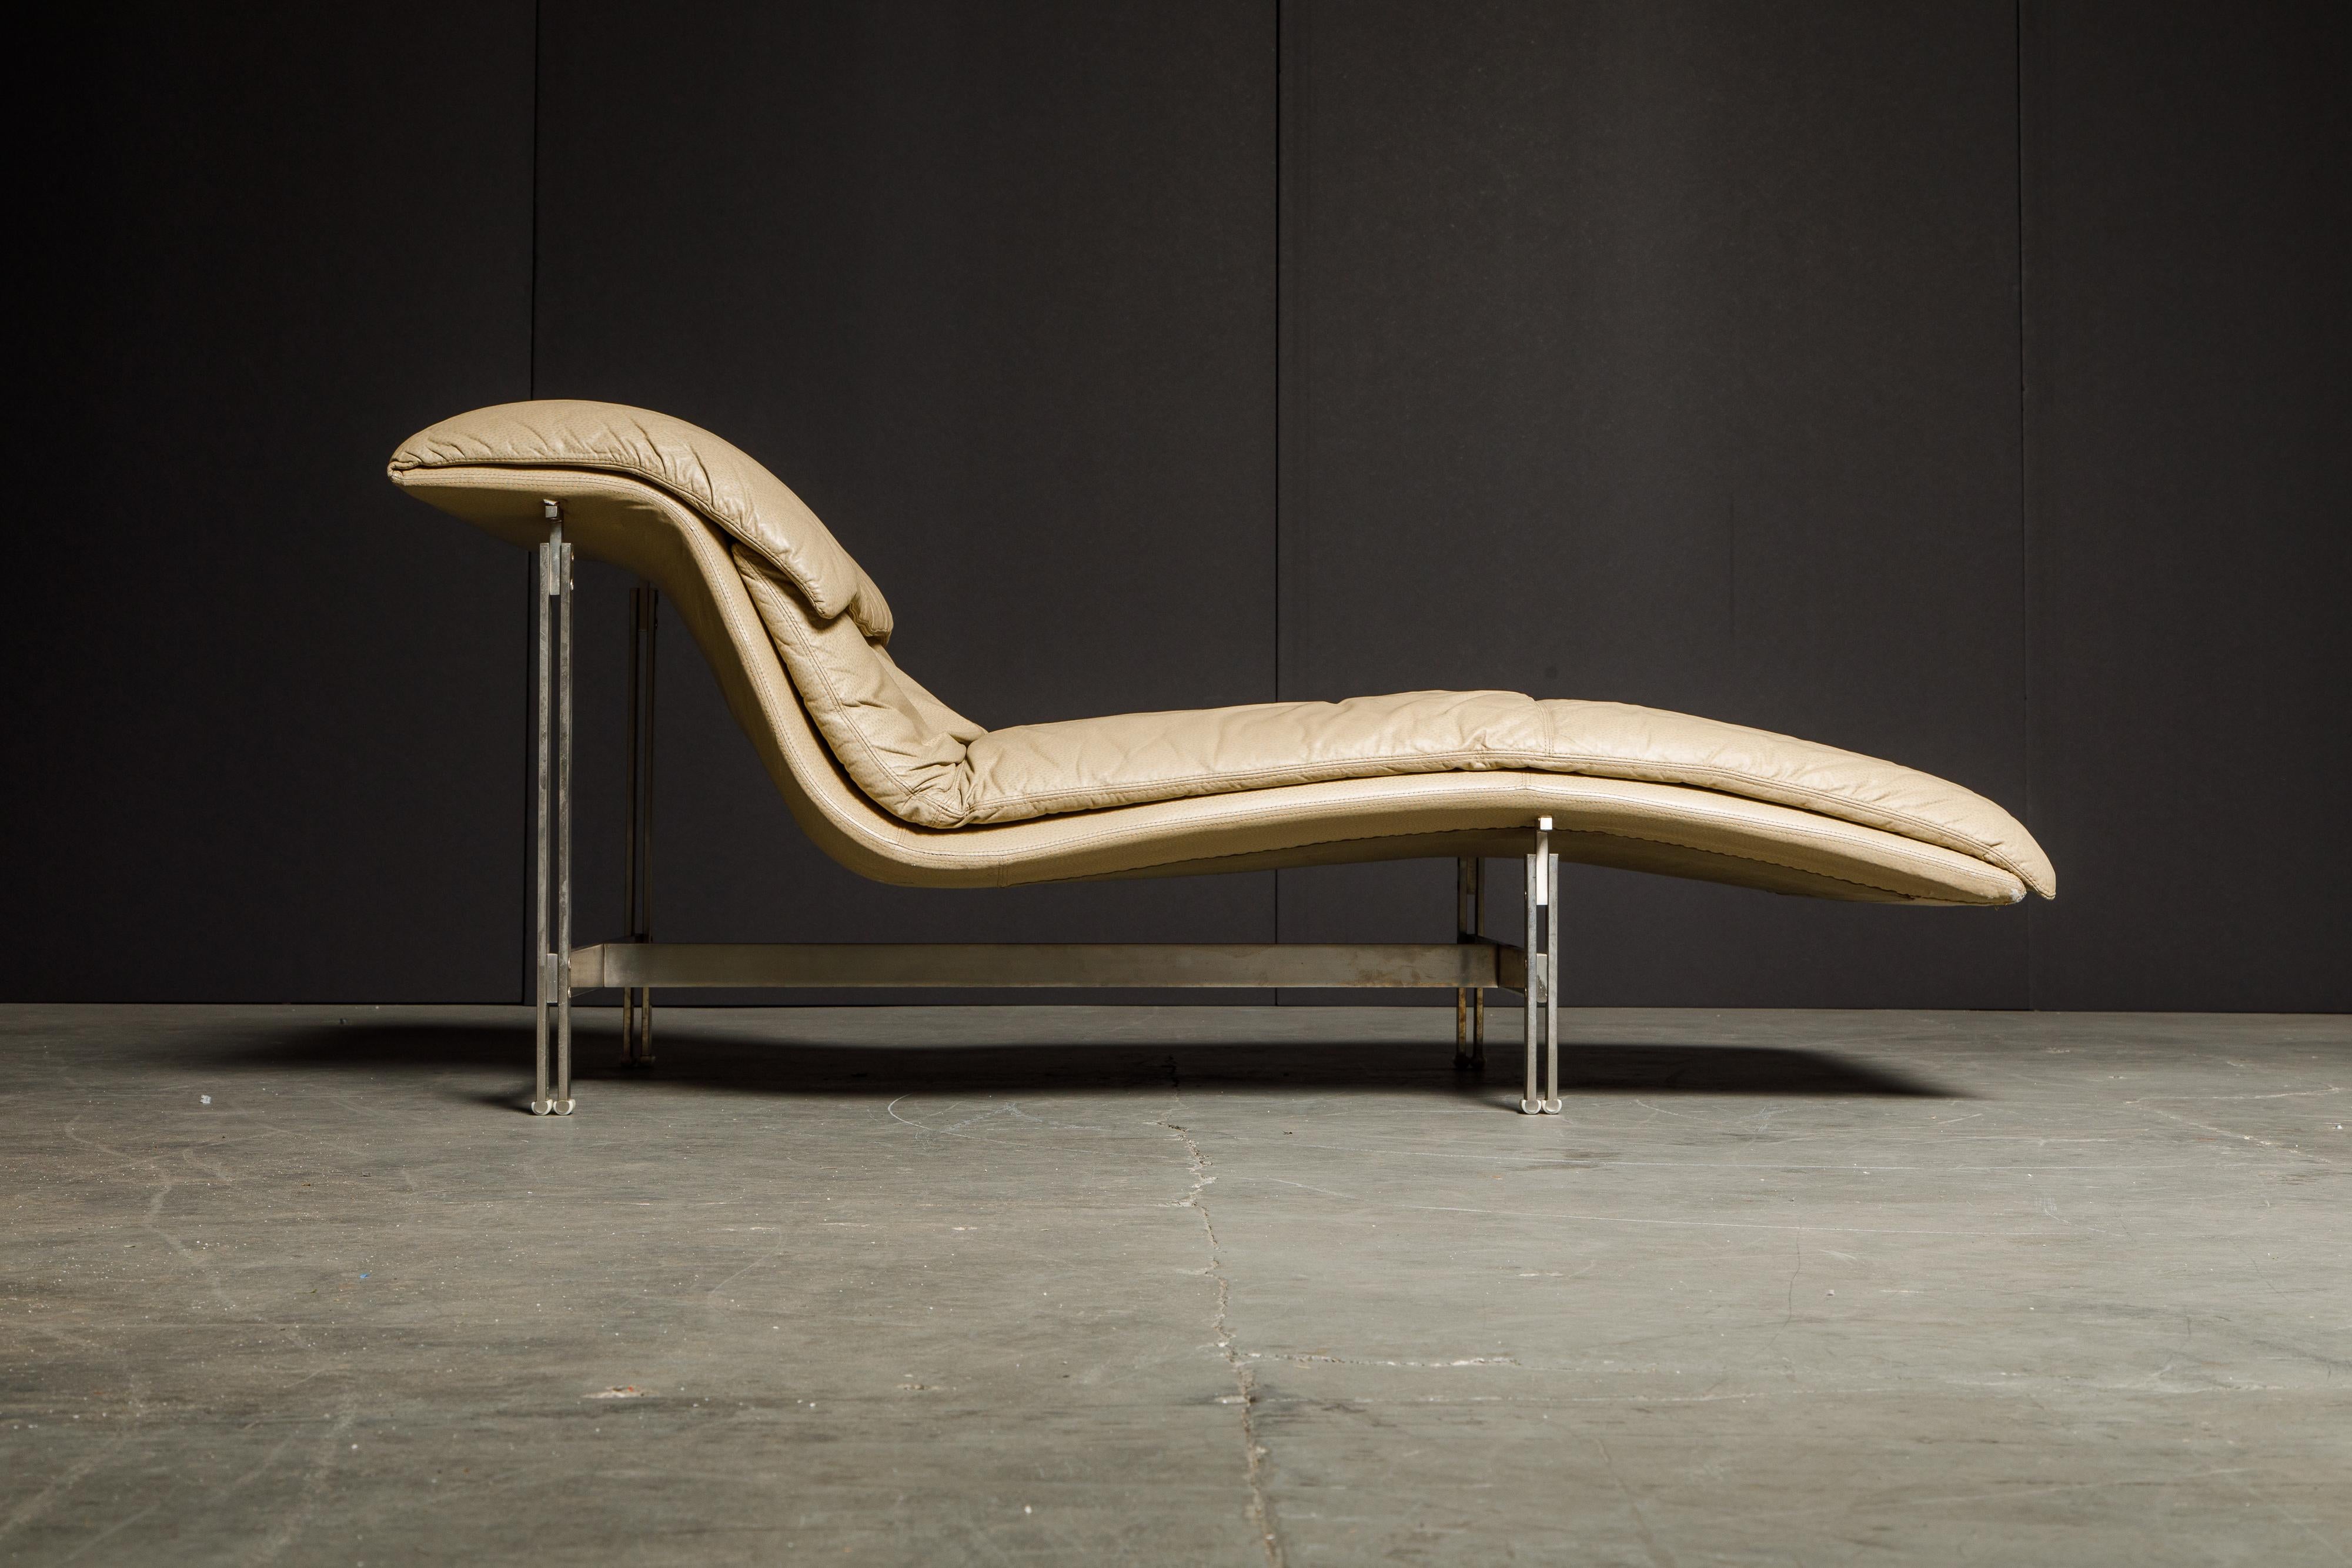 This eye catching leather 'Wave' chaise lounge by Giovanni Offredi for Saporiti Italia was designed in 1974 and was an instant hit to interior designers and fashion forward interior decors. Italian cutting edge sensibility and style along with high